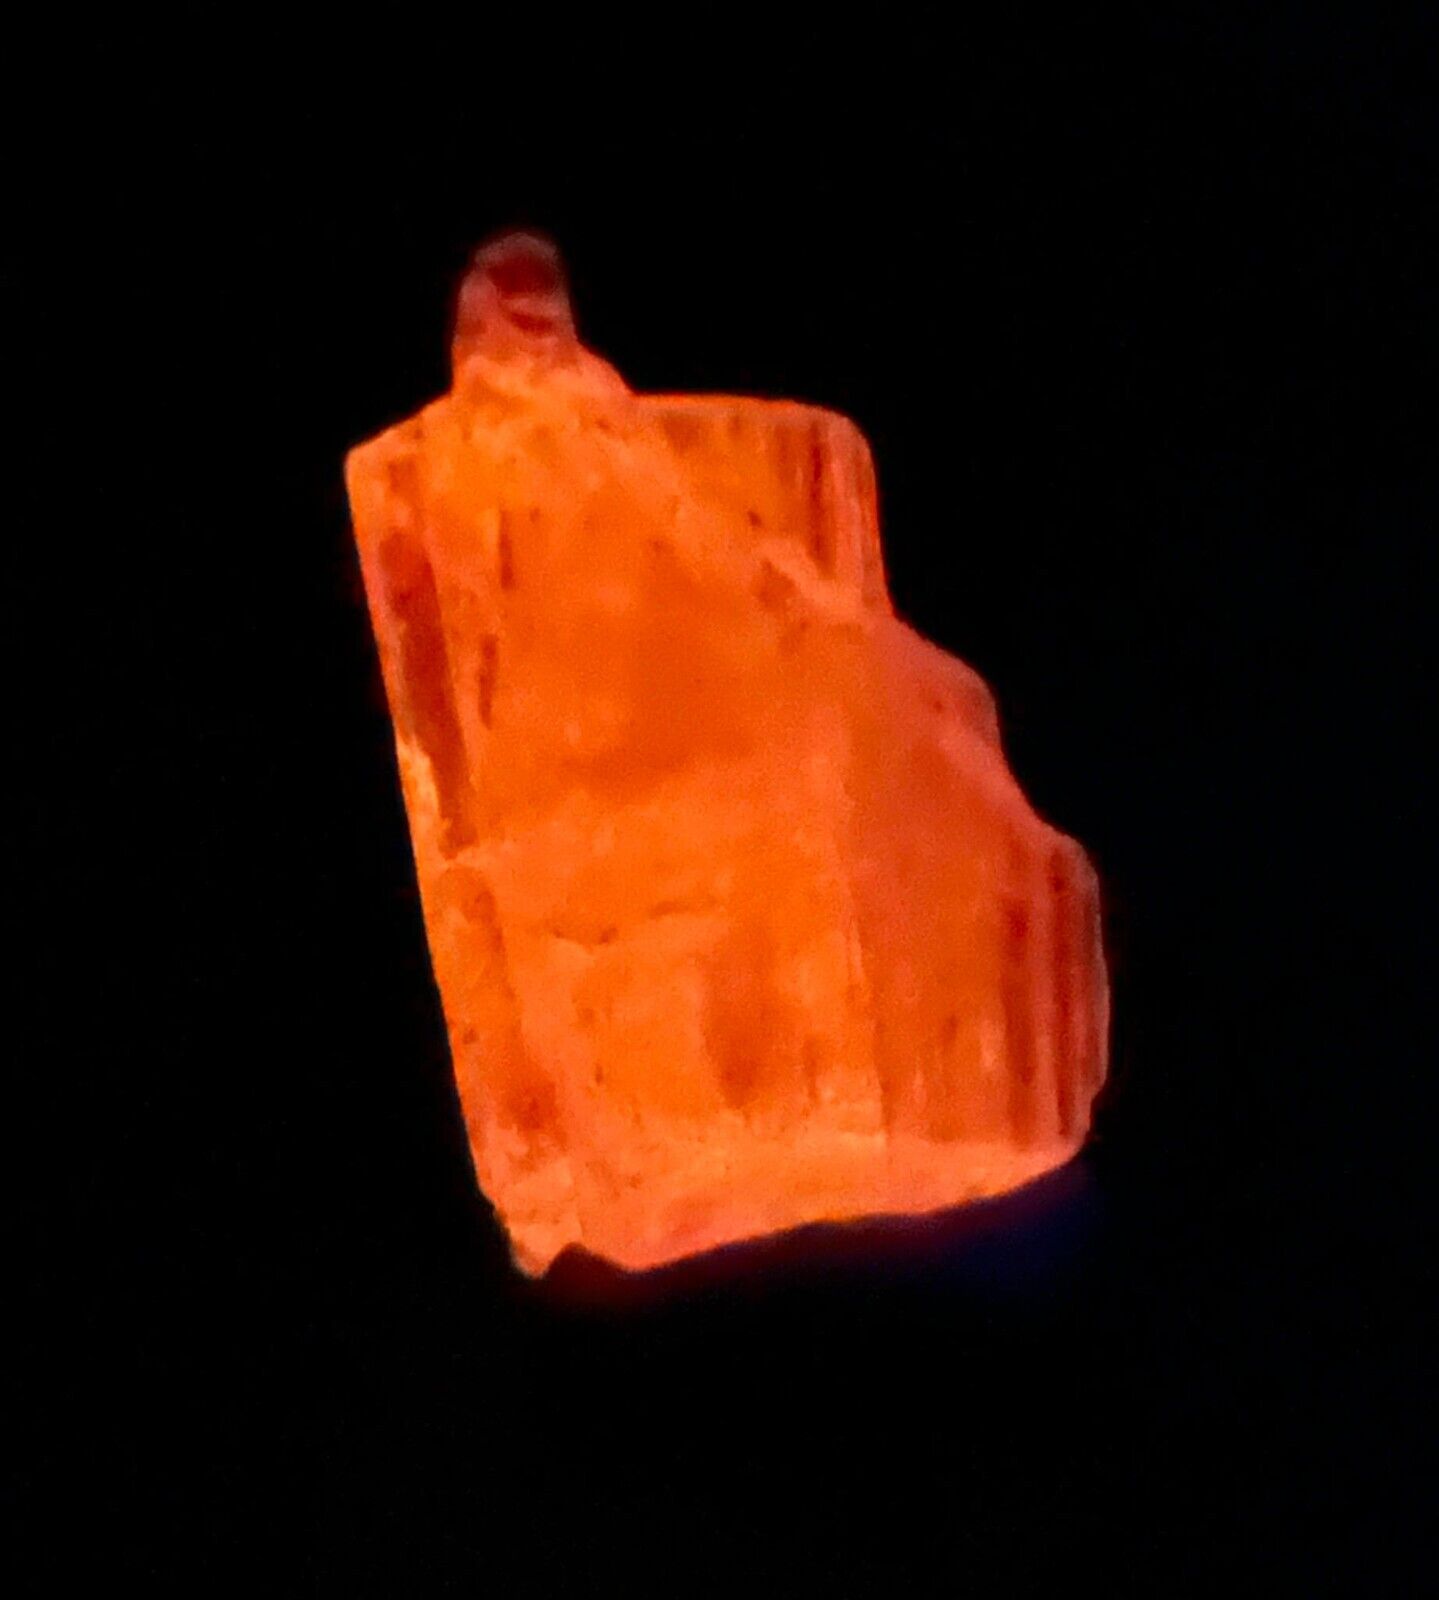 19 Cts Extremely Rare Fluorescent, Phosphorescent Kunzite Crystal From @AFG